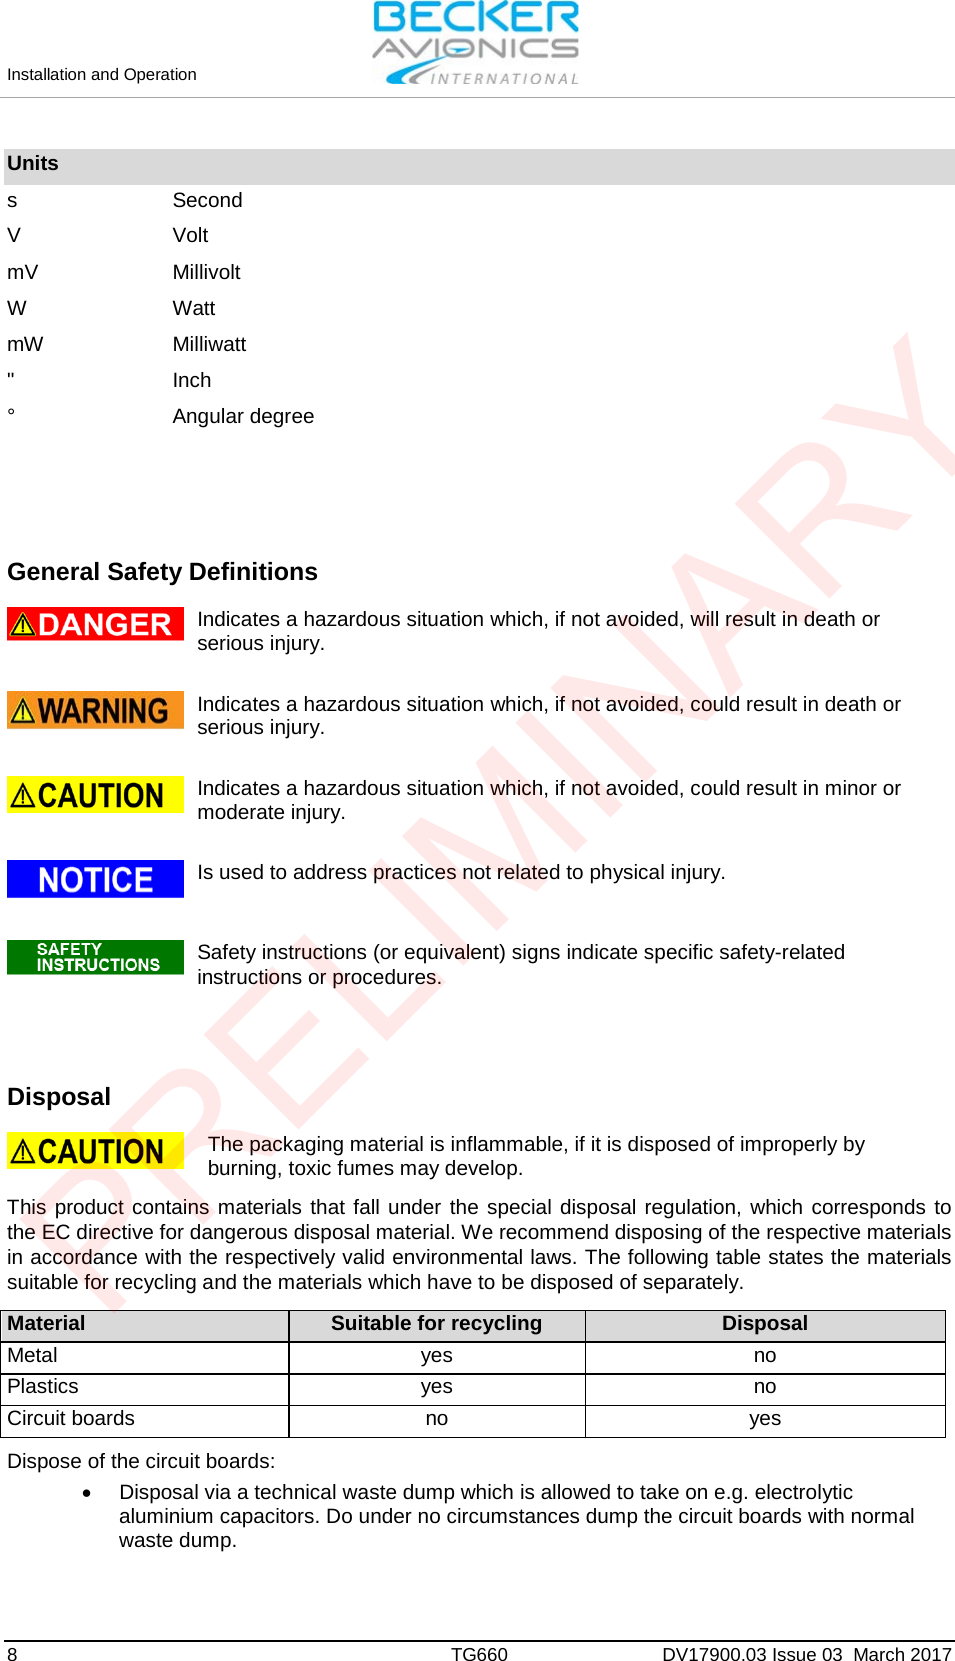 Installation and Operation 8  TG660 DV17900.03 Issue 03  March 2017 Units s Second V Volt mV Millivolt W Watt mW Milliwatt &quot; Inch ° Angular degree General Safety Definitions Indicates a hazardous situation which, if not avoided, will result in death or serious injury. Indicates a hazardous situation which, if not avoided, could result in death or serious injury. Indicates a hazardous situation which, if not avoided, could result in minor or moderate injury. Is used to address practices not related to physical injury. Safety instructions (or equivalent) signs indicate specific safety-related instructions or procedures. Disposal The packaging material is inflammable, if it is disposed of improperly by burning, toxic fumes may develop. This product contains materials that fall under the special disposal regulation, which corresponds to the EC directive for dangerous disposal material. We recommend disposing of the respective materials in accordance with the respectively valid environmental laws. The following table states the materials suitable for recycling and the materials which have to be disposed of separately.  Material Suitable for recycling Disposal Metal yes no Plastics yes no Circuit boards no yes  Dispose of the circuit boards: •Disposal via a technical waste dump which is allowed to take on e.g. electrolyticaluminium capacitors. Do under no circumstances dump the circuit boards with normalwaste dump.PRELIMINARY